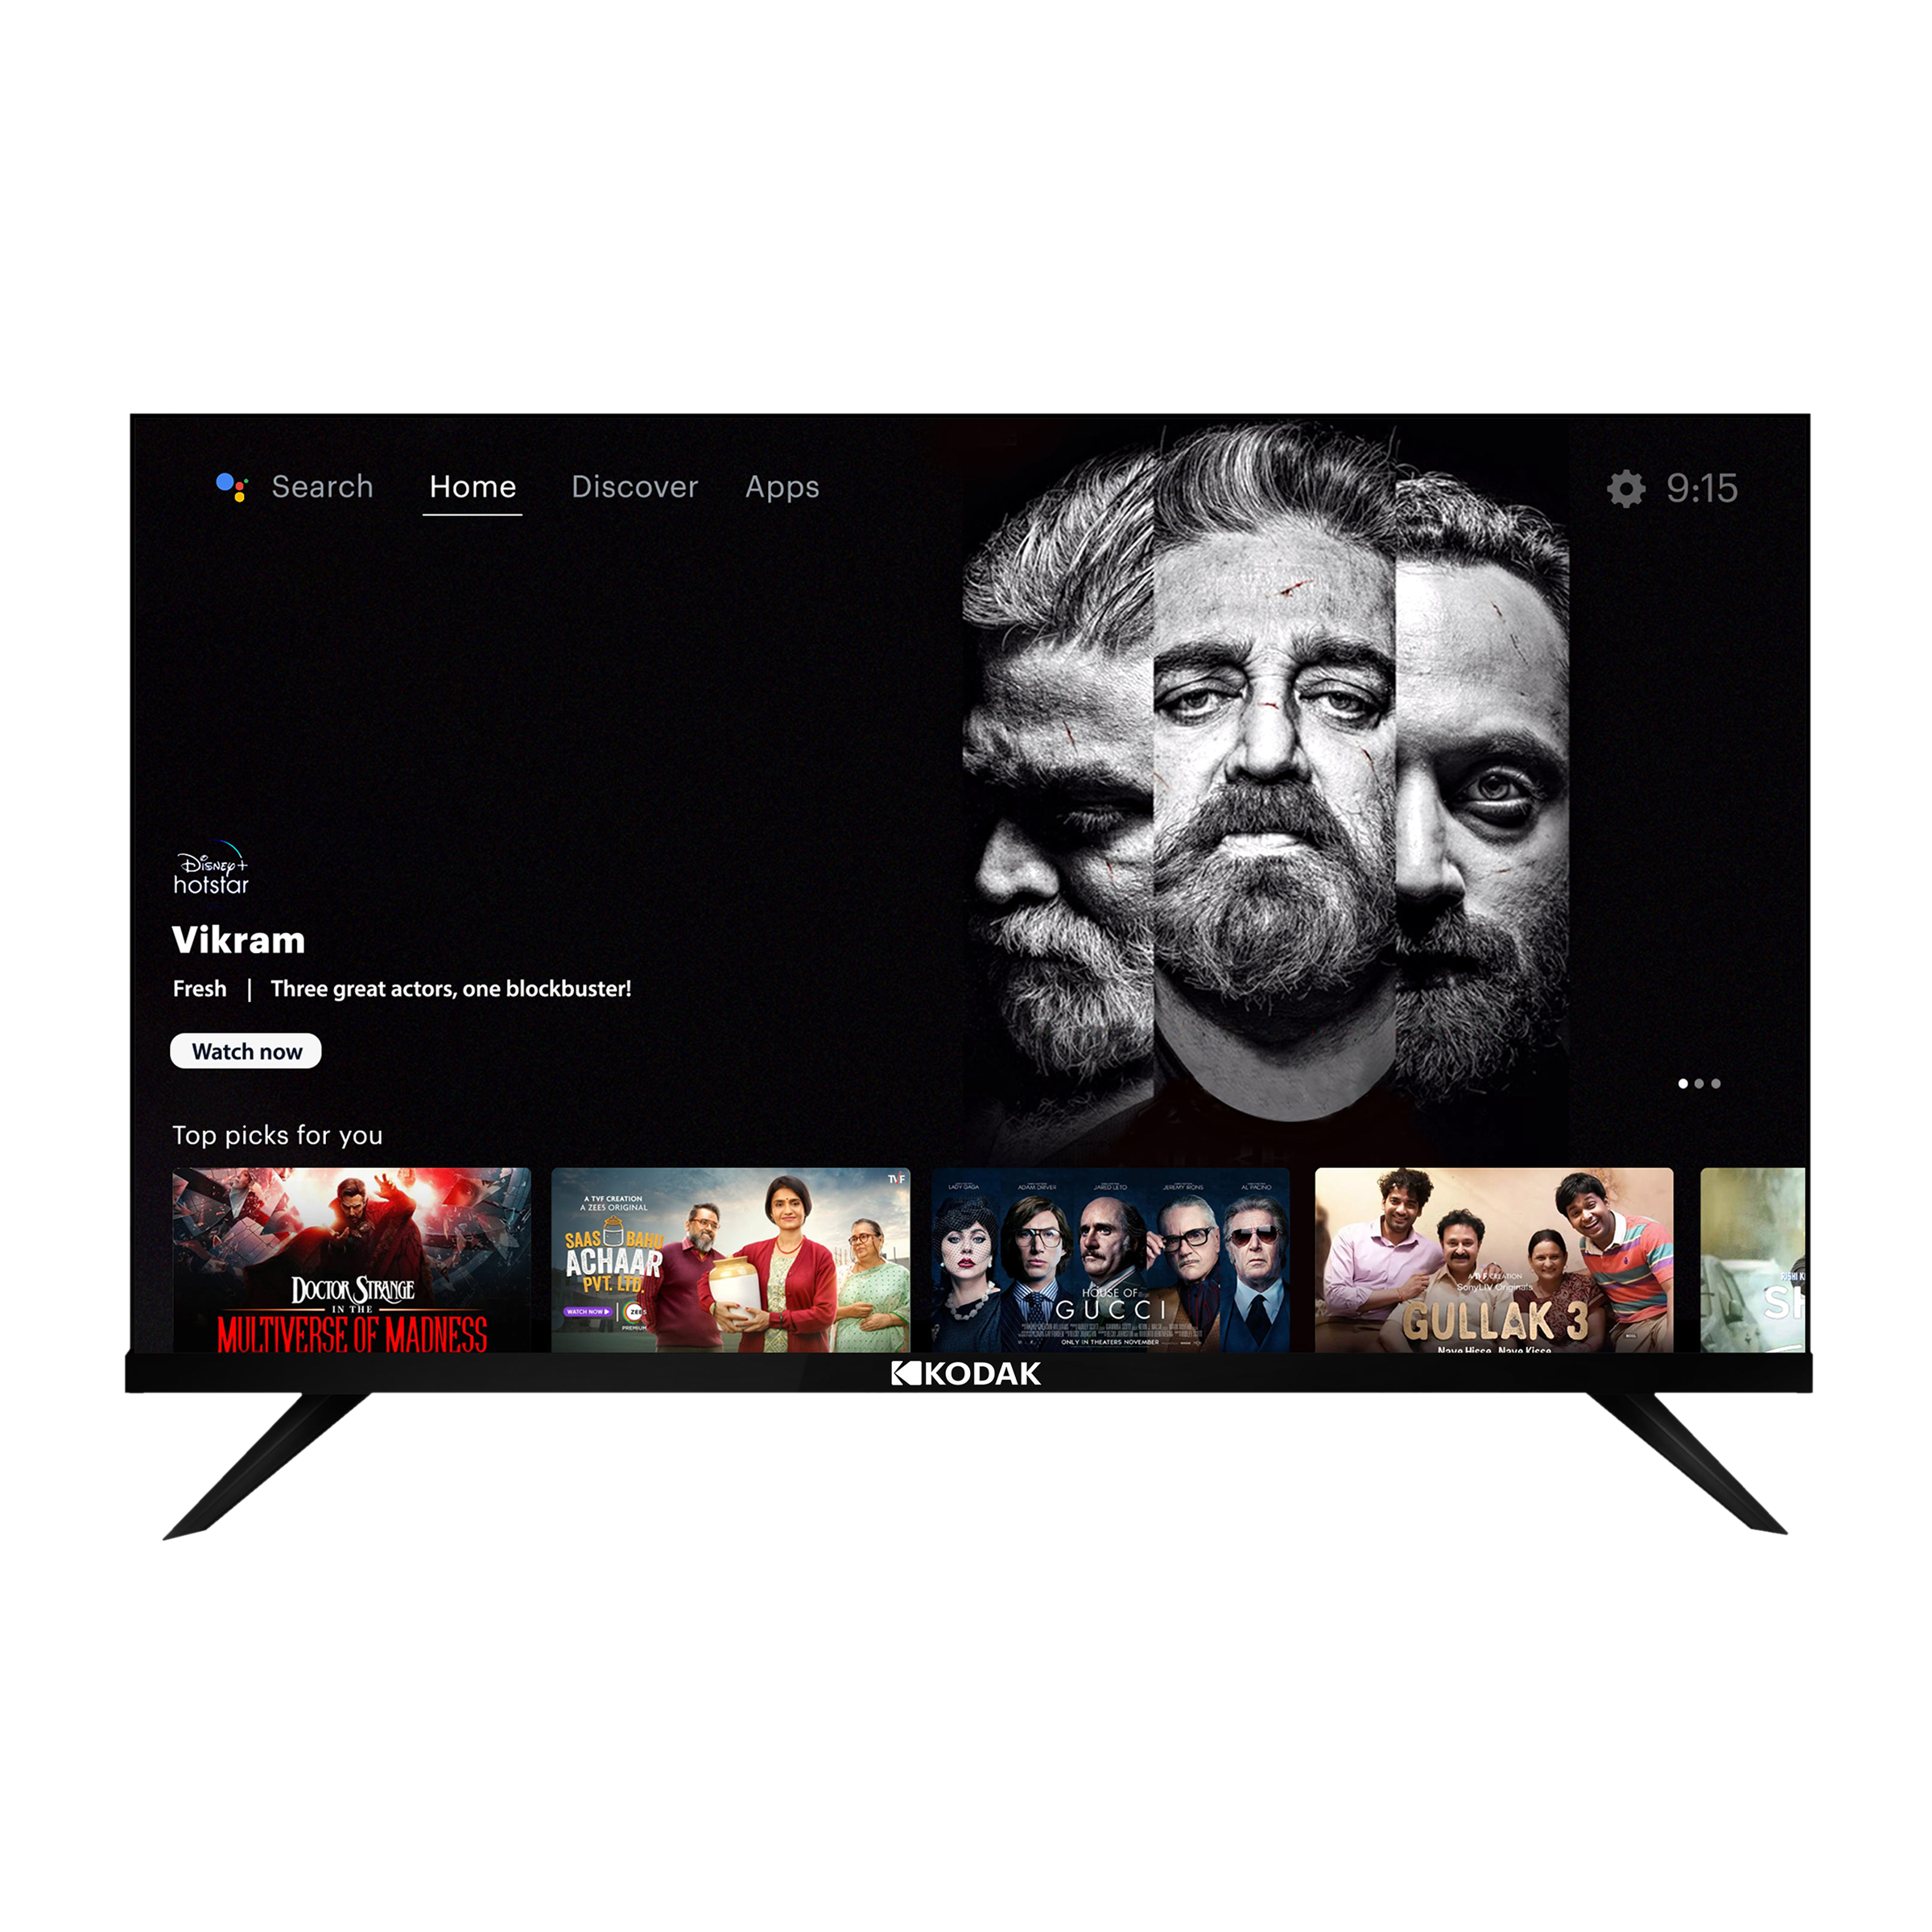 Kodak 7XPRO Series 139 cm (55 inch) 4K Ultra HD LED Android TV with Google Assistant (2021 model)_1